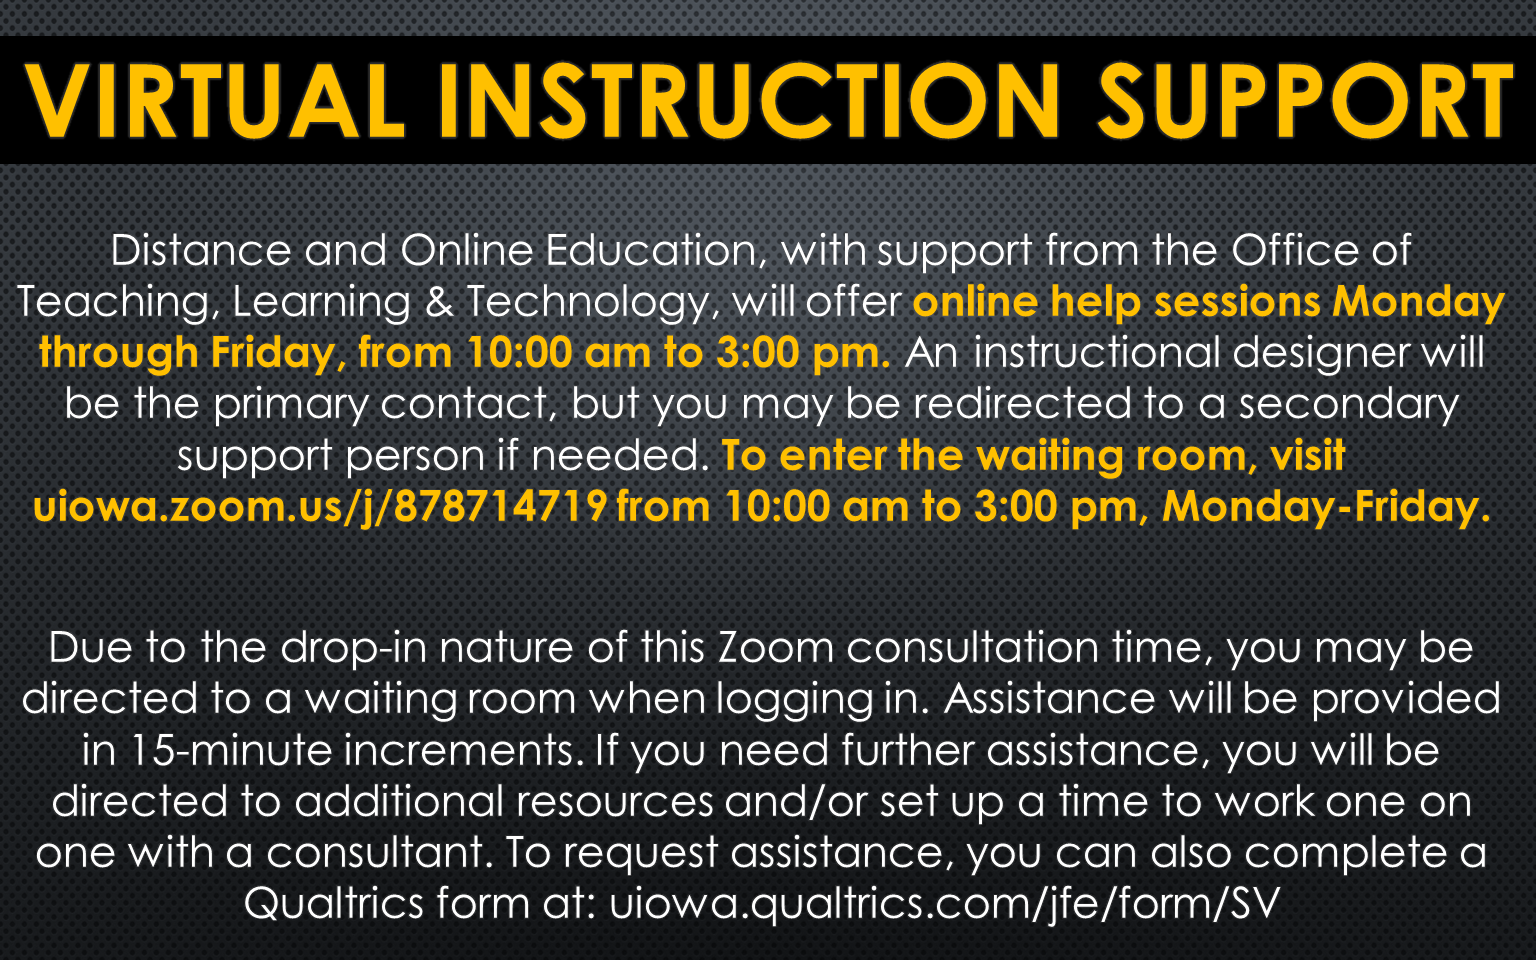 2020March-Virtual Instruction Support